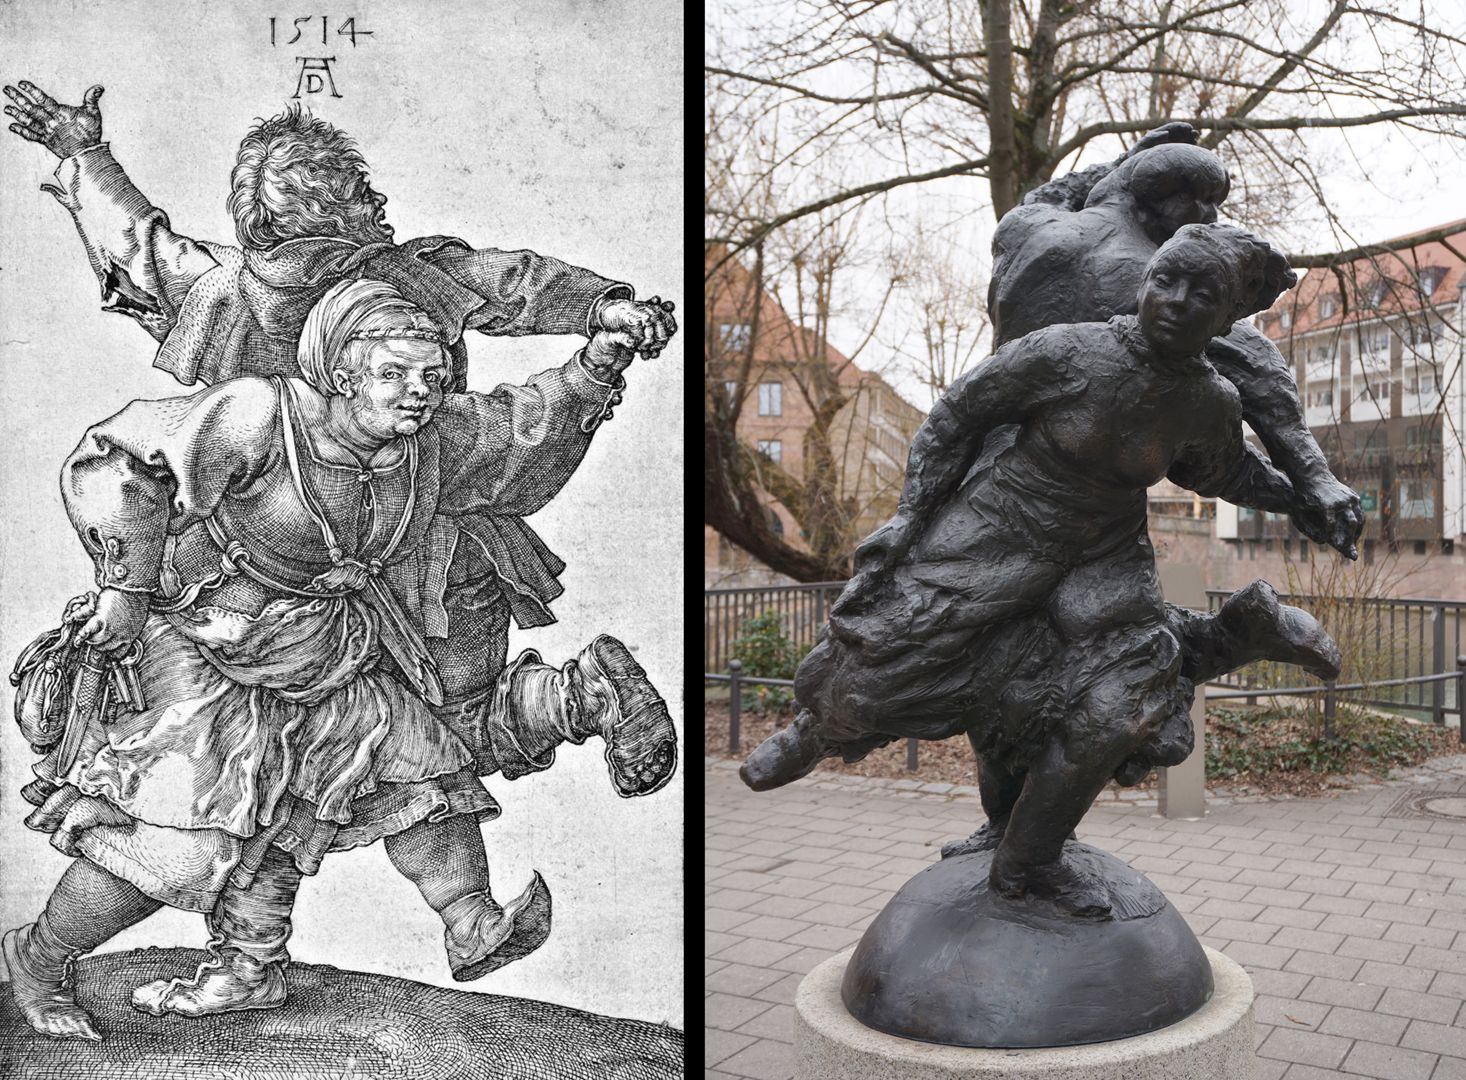 Dancing peasant couple Image comparison: copperplate engraving by Dürer from 1514 with the finished sculpture.